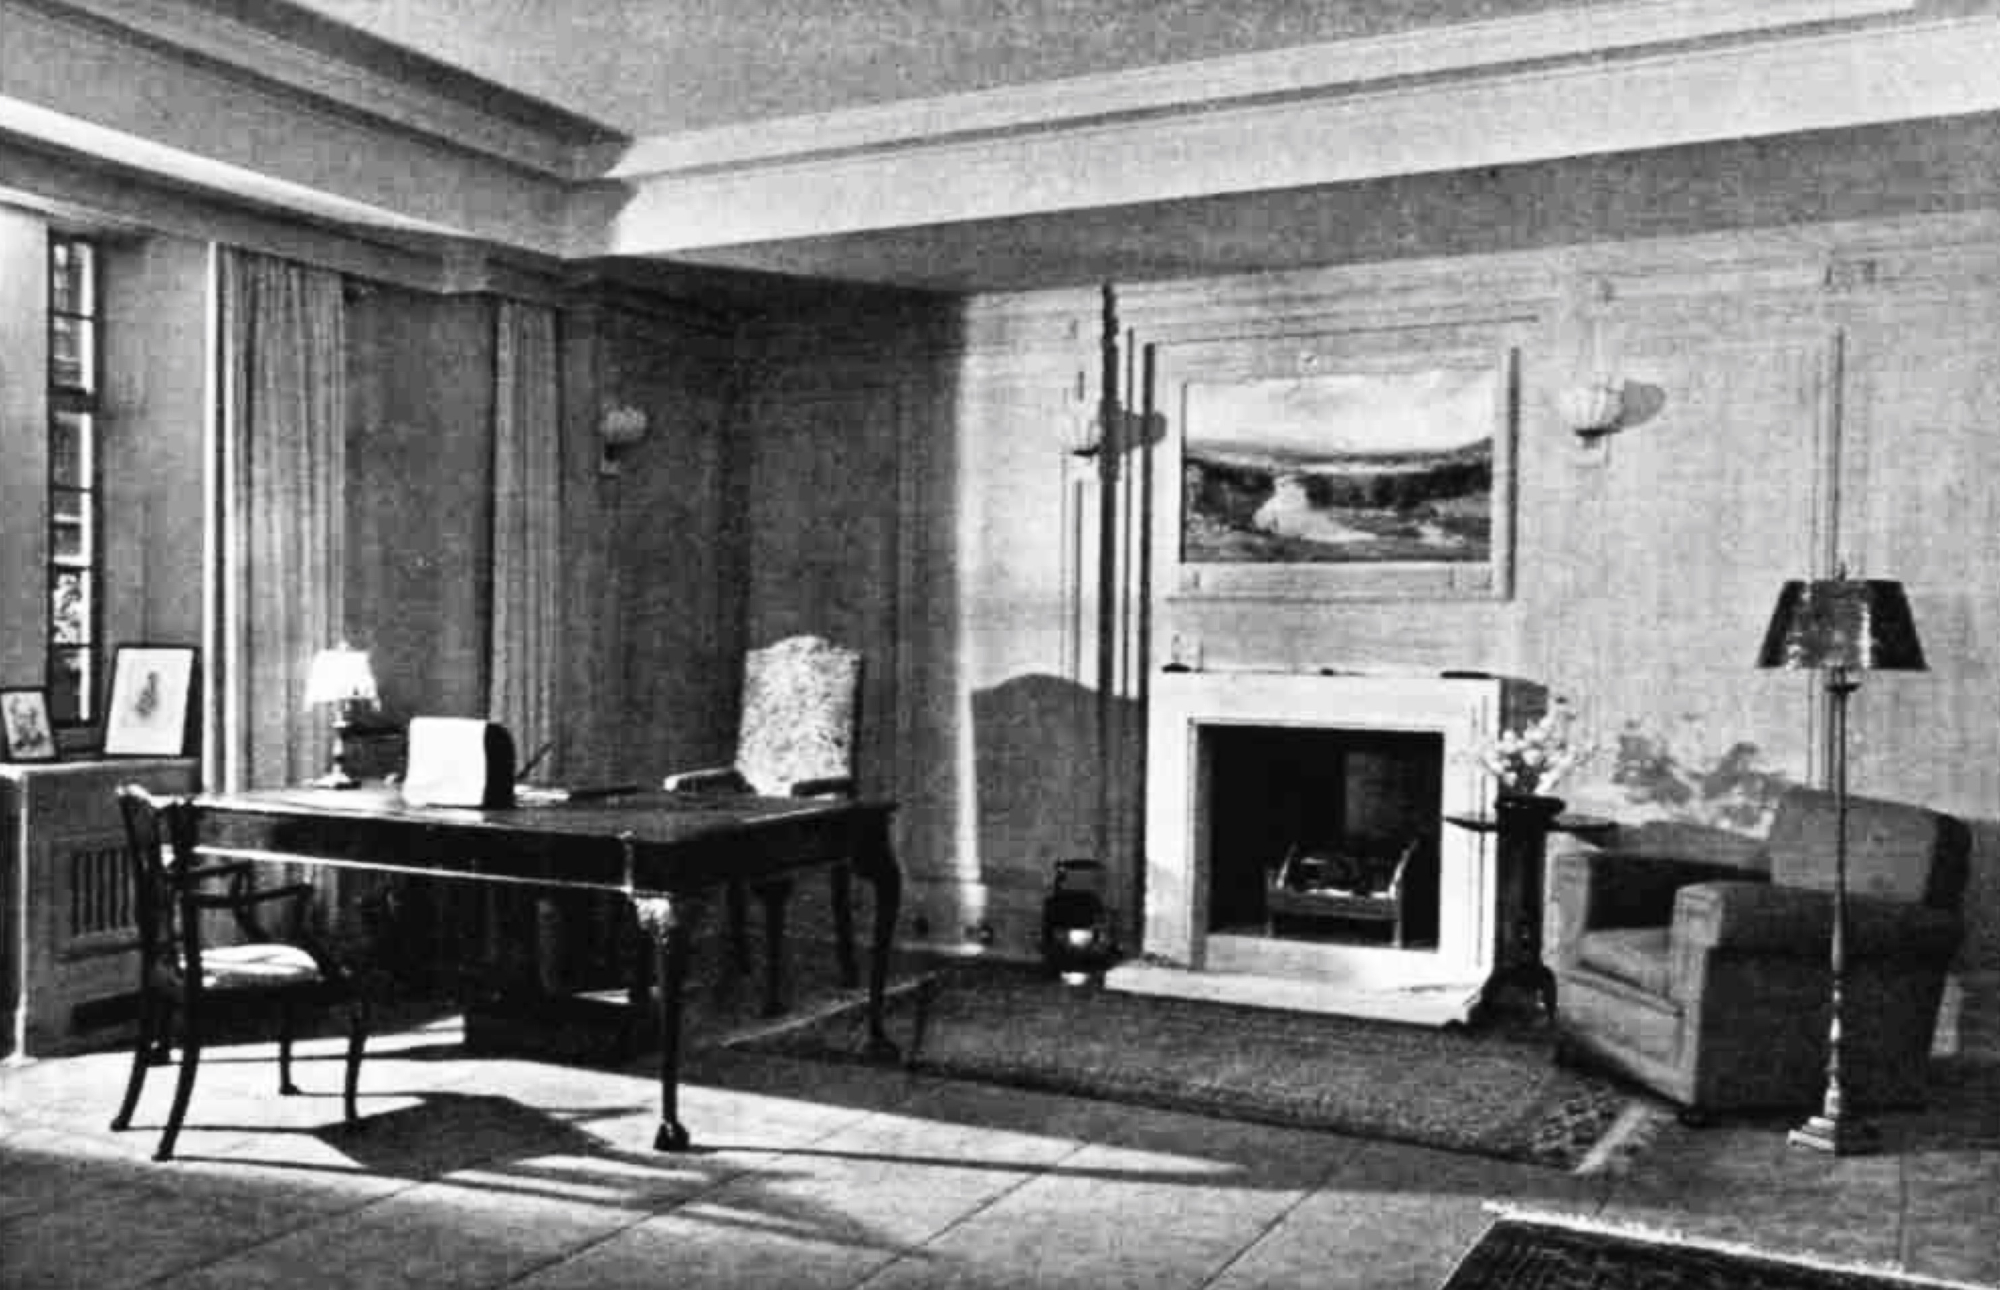 A room with wooden walls, a fireplace and an ornate desk with one commanding chair and one basic chair